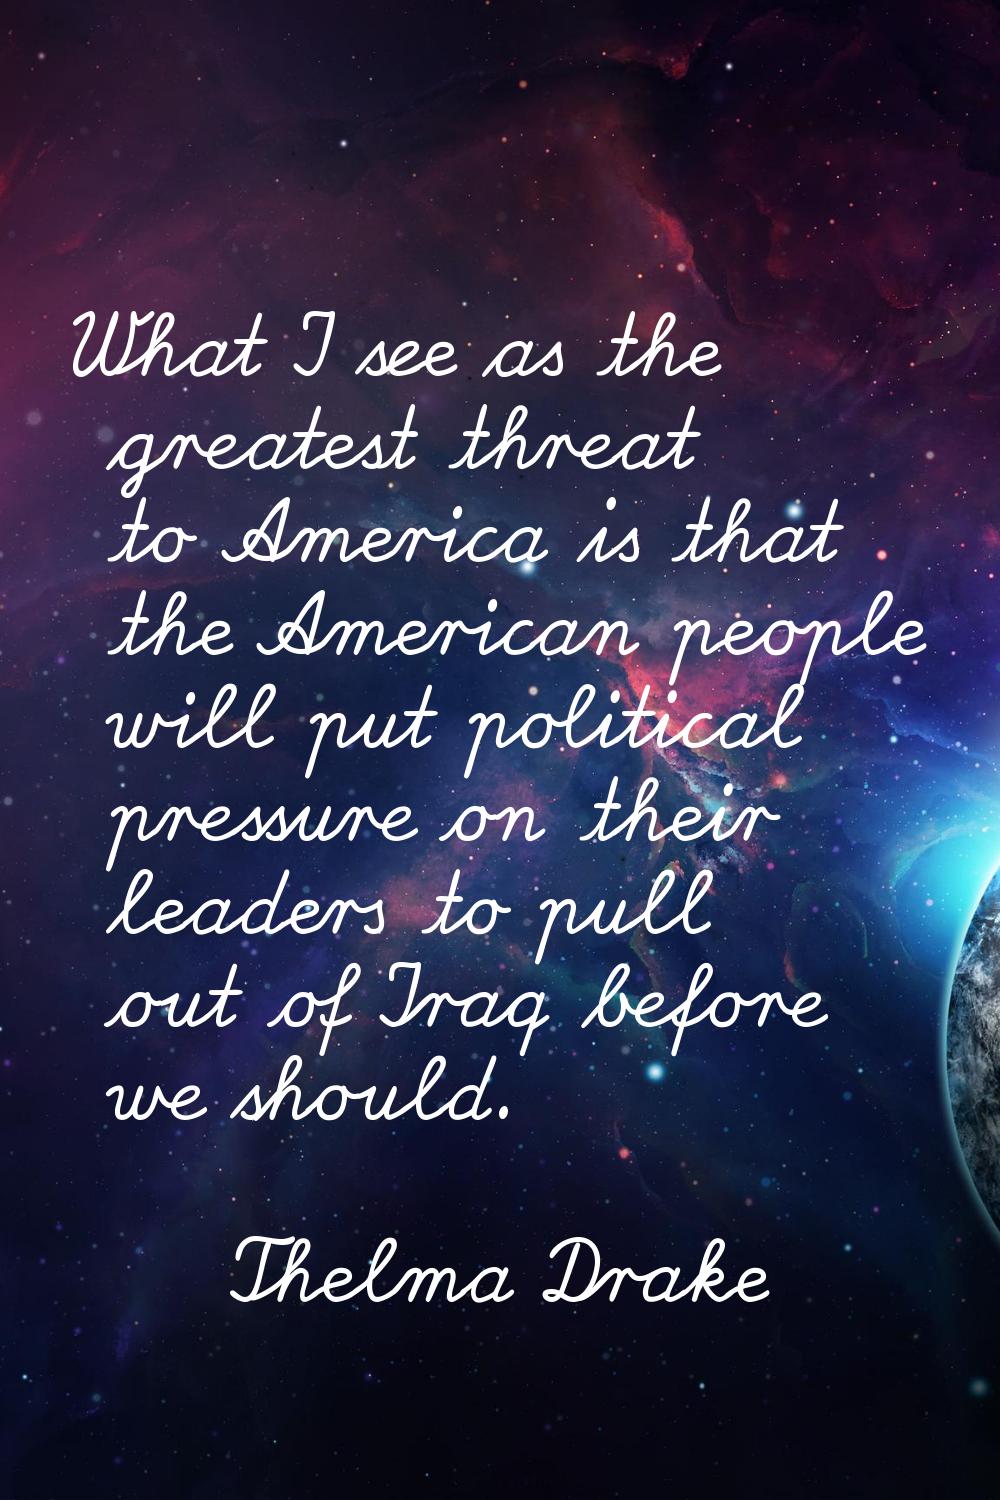 What I see as the greatest threat to America is that the American people will put political pressur